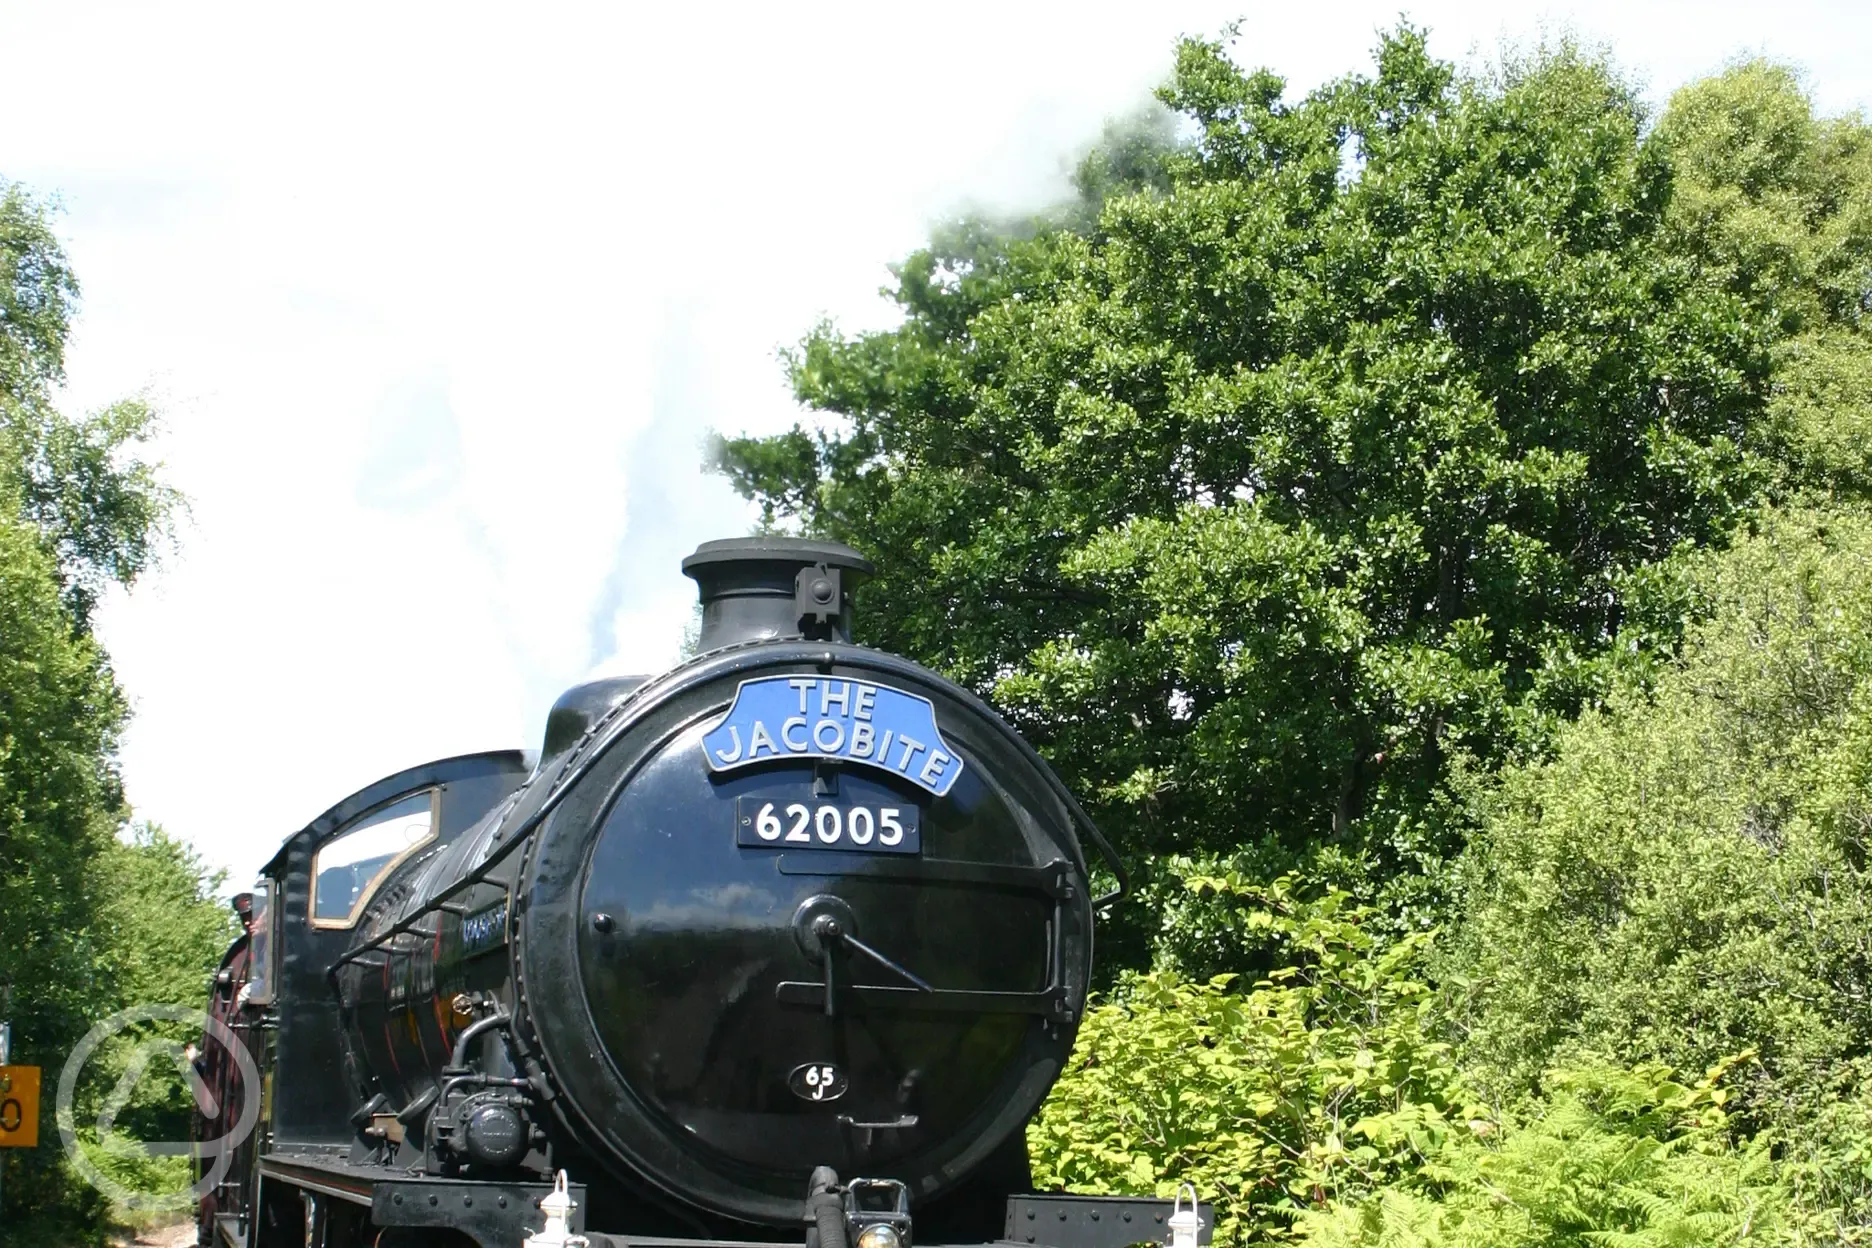 See or journey on the Jacobite,Harry Potter, Steam Train